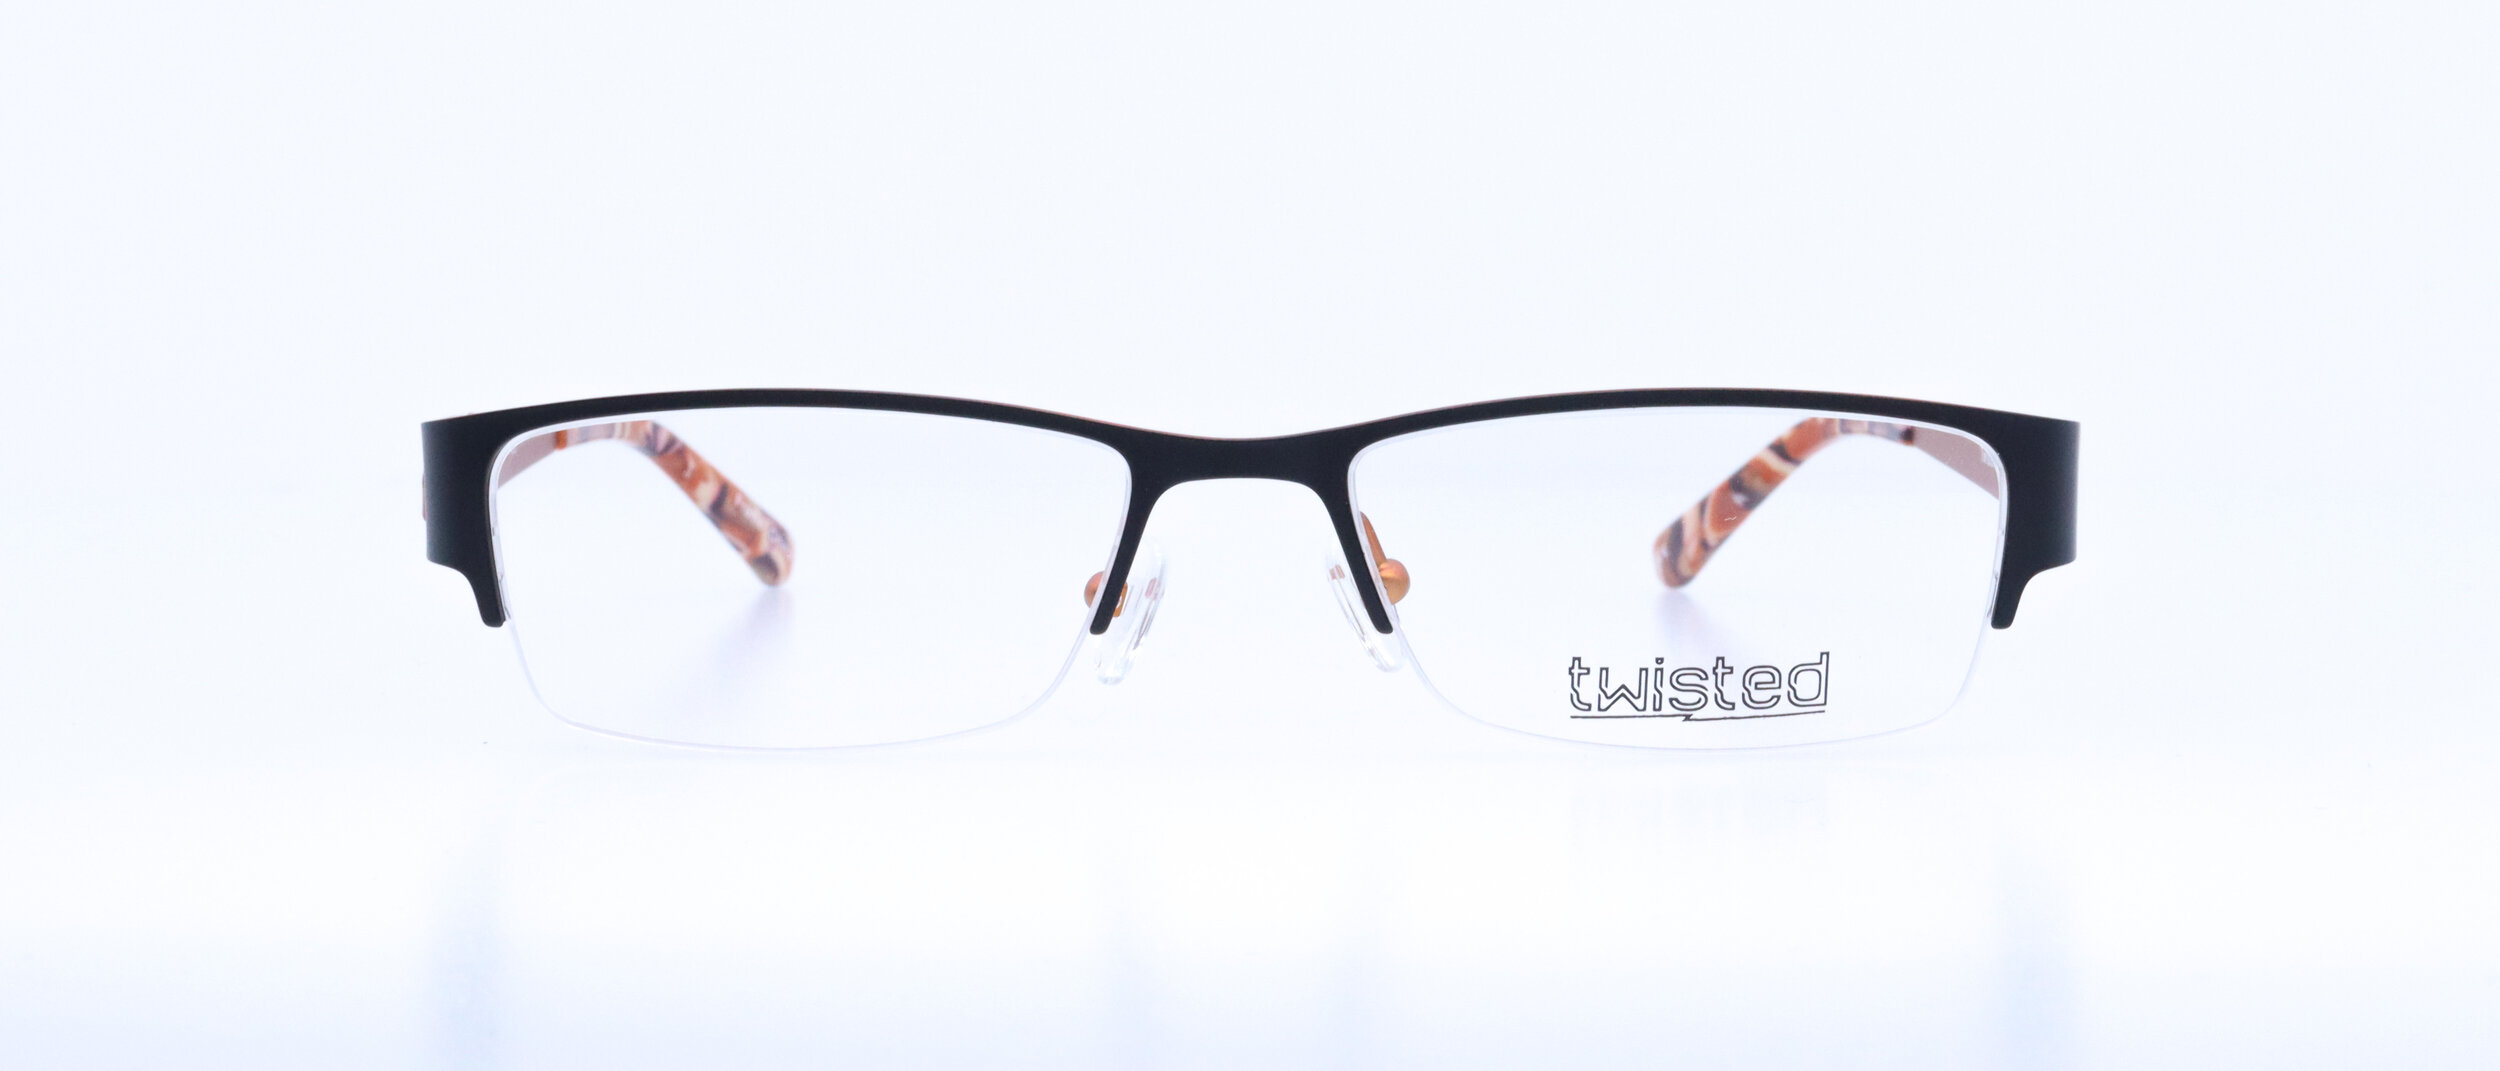  TW101: 53-17-138, Available in Black/Orange, Black/Turquoise, or Blue/Green 